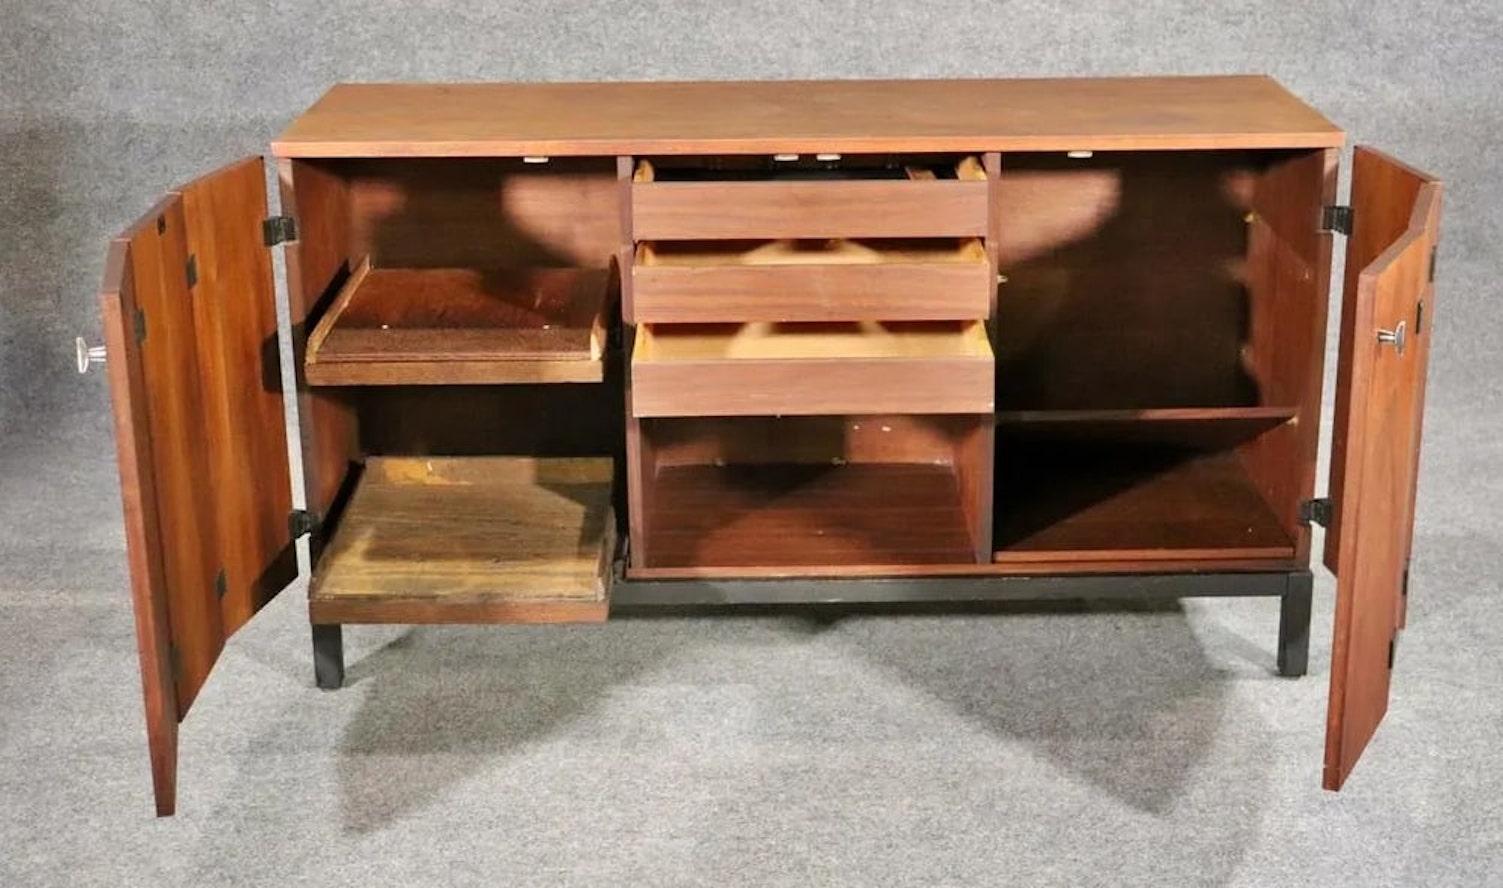 Mid-century modern sideboard with bi-fold doors, matte black base, and matching black exposed hinges. Designed for Directional by Milo Baughman, and manufactured by Johnson Furniture in Grand Rapids.
Please confirm location NY or NJ.